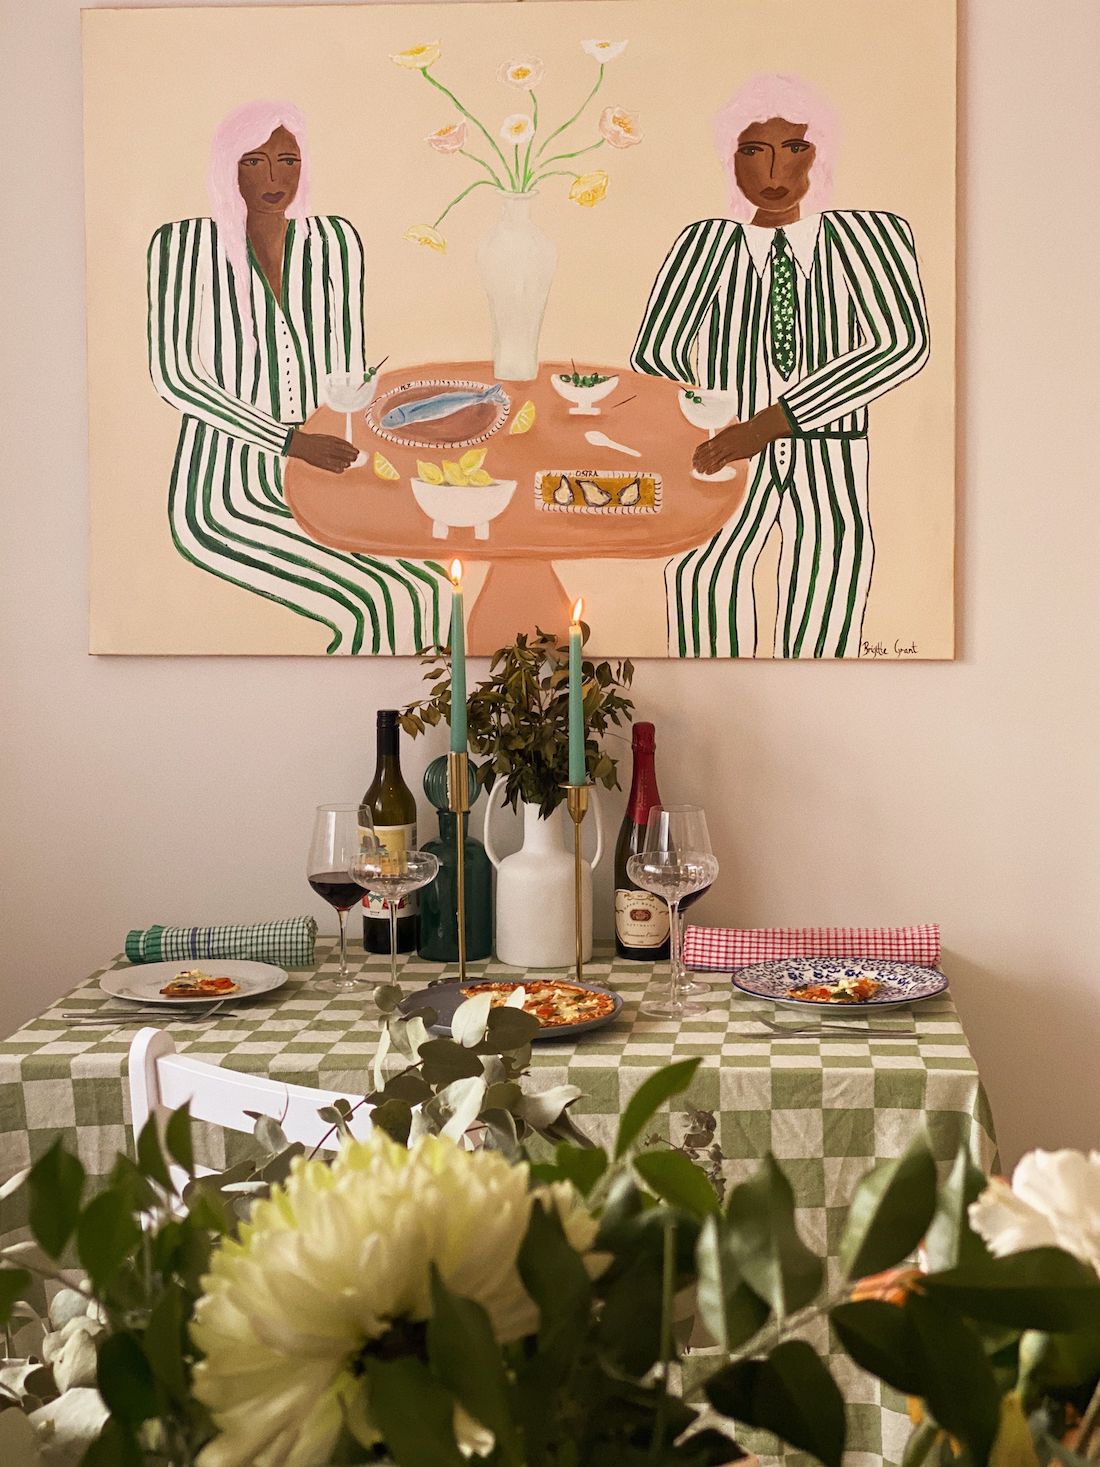 Dining table setting with artwork above